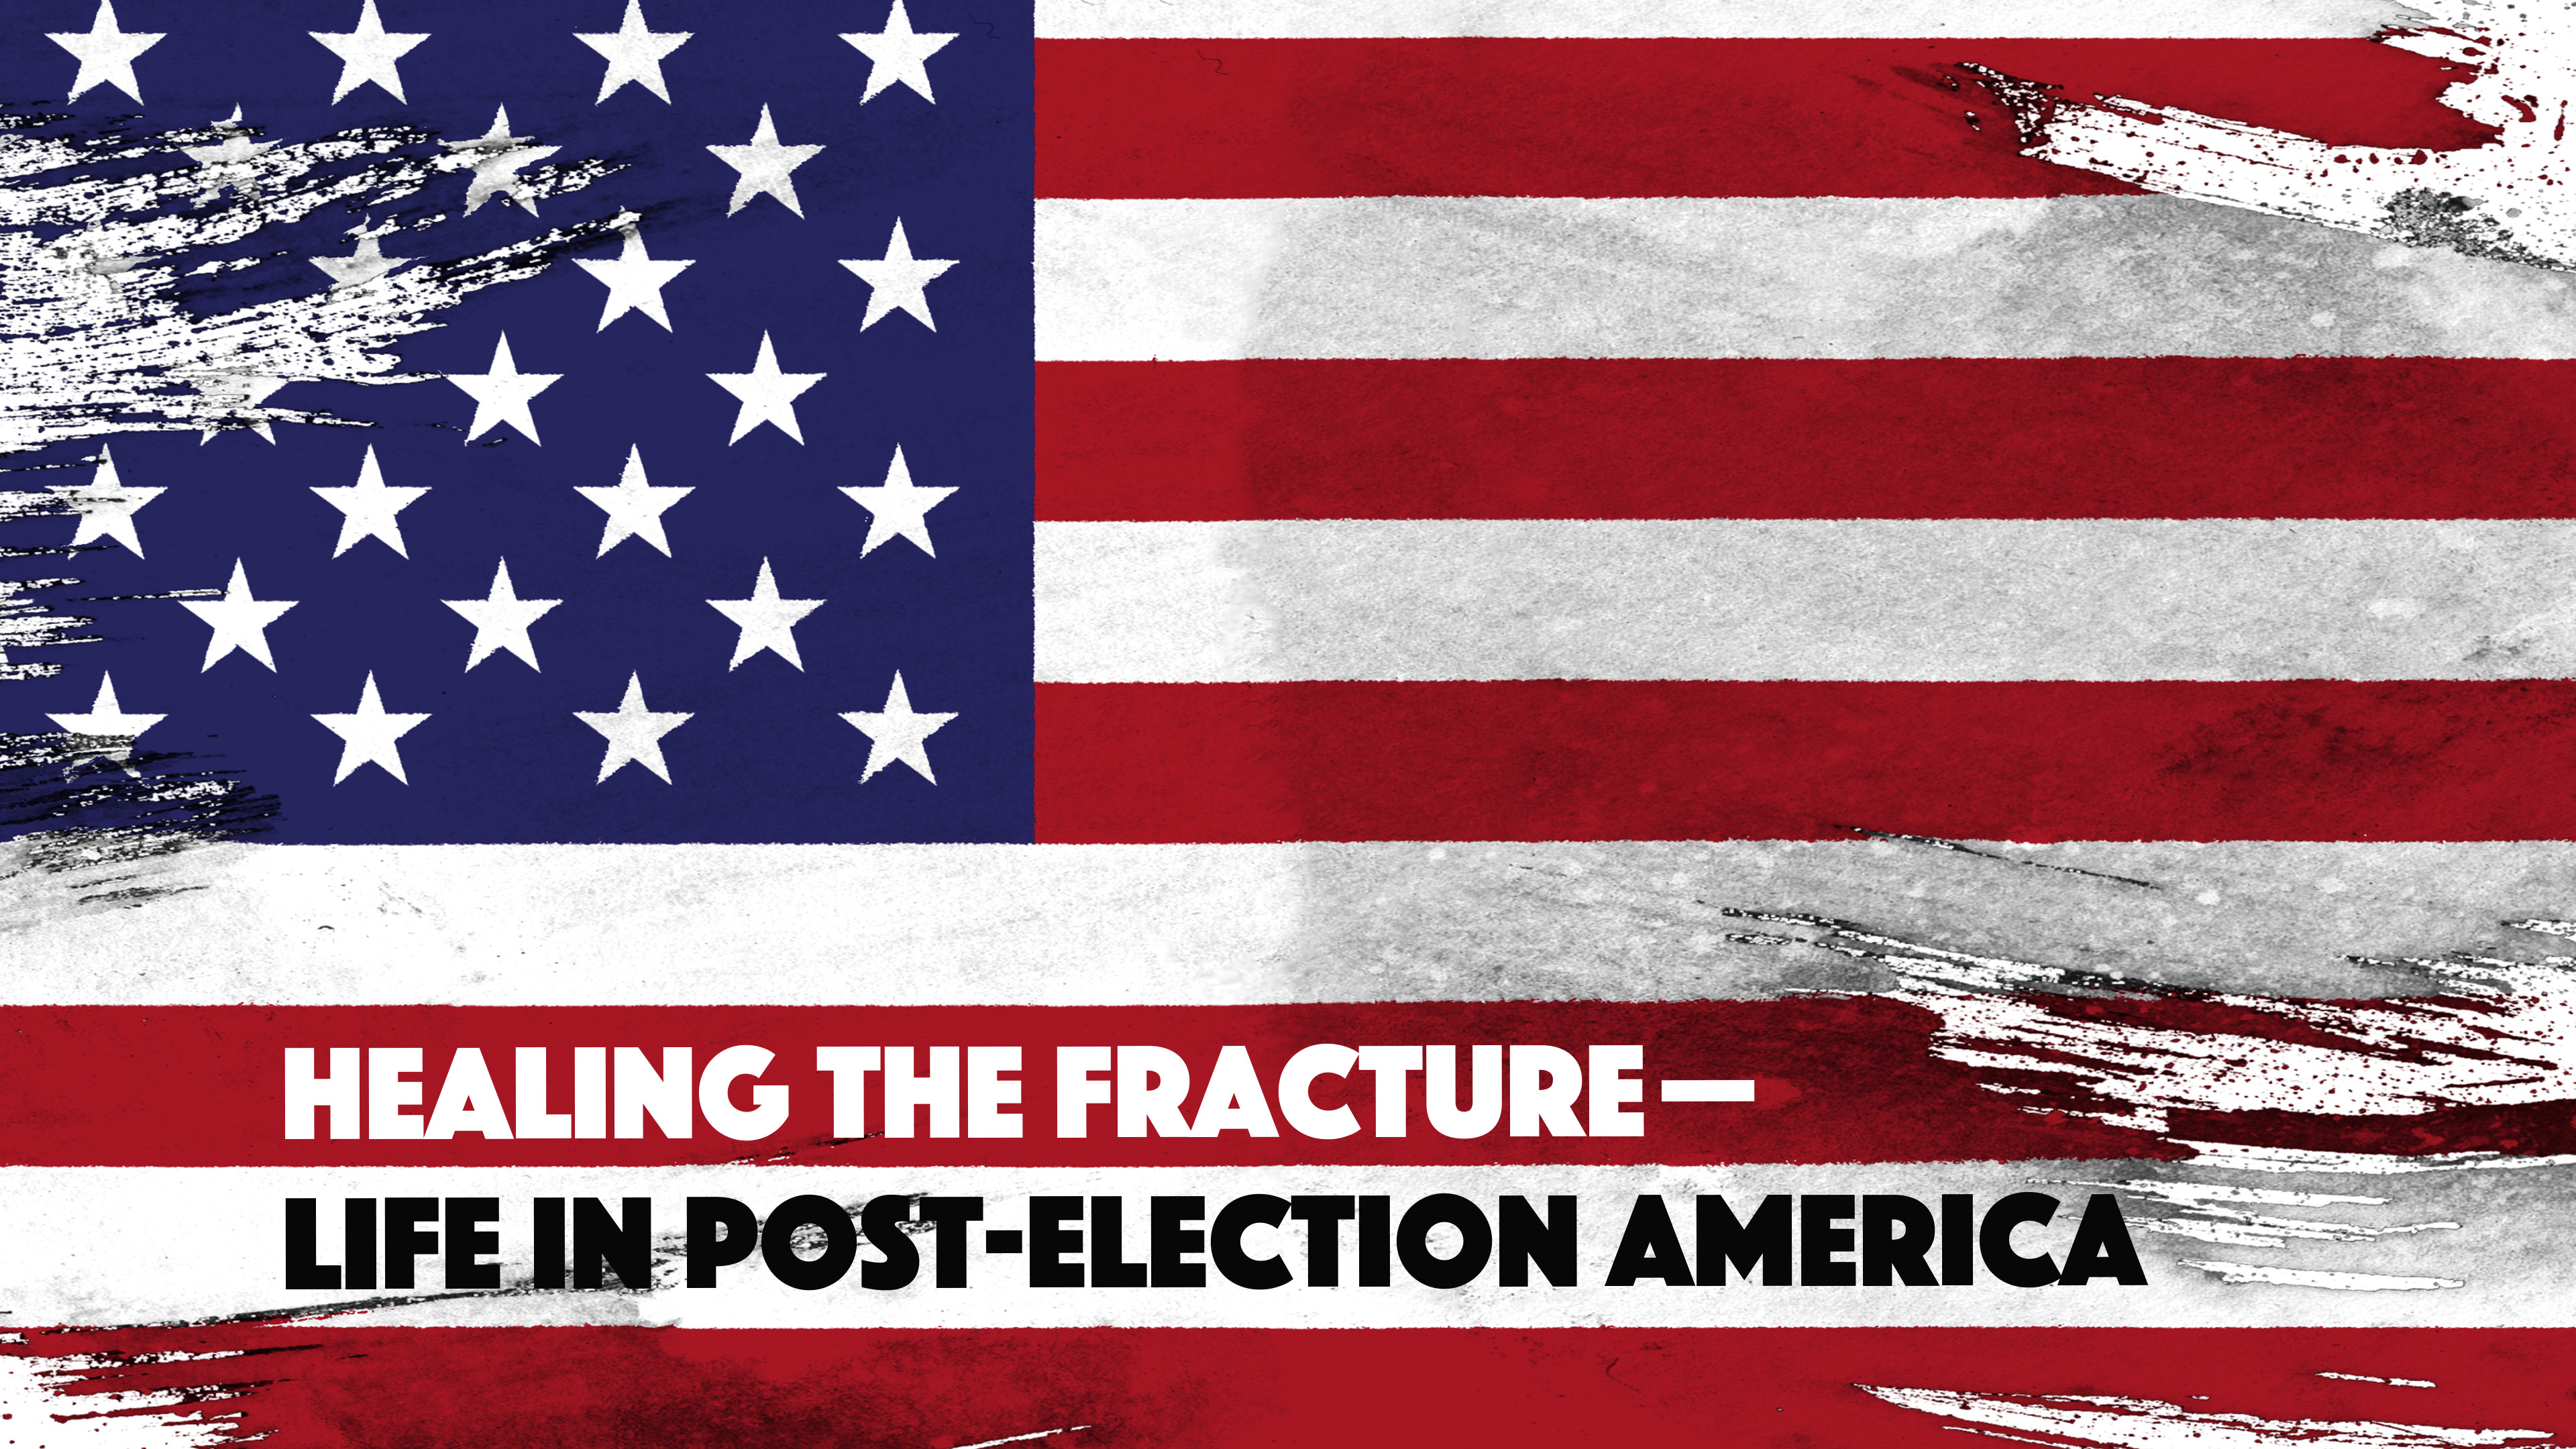 Healing the Fracture - Life in Post-election America